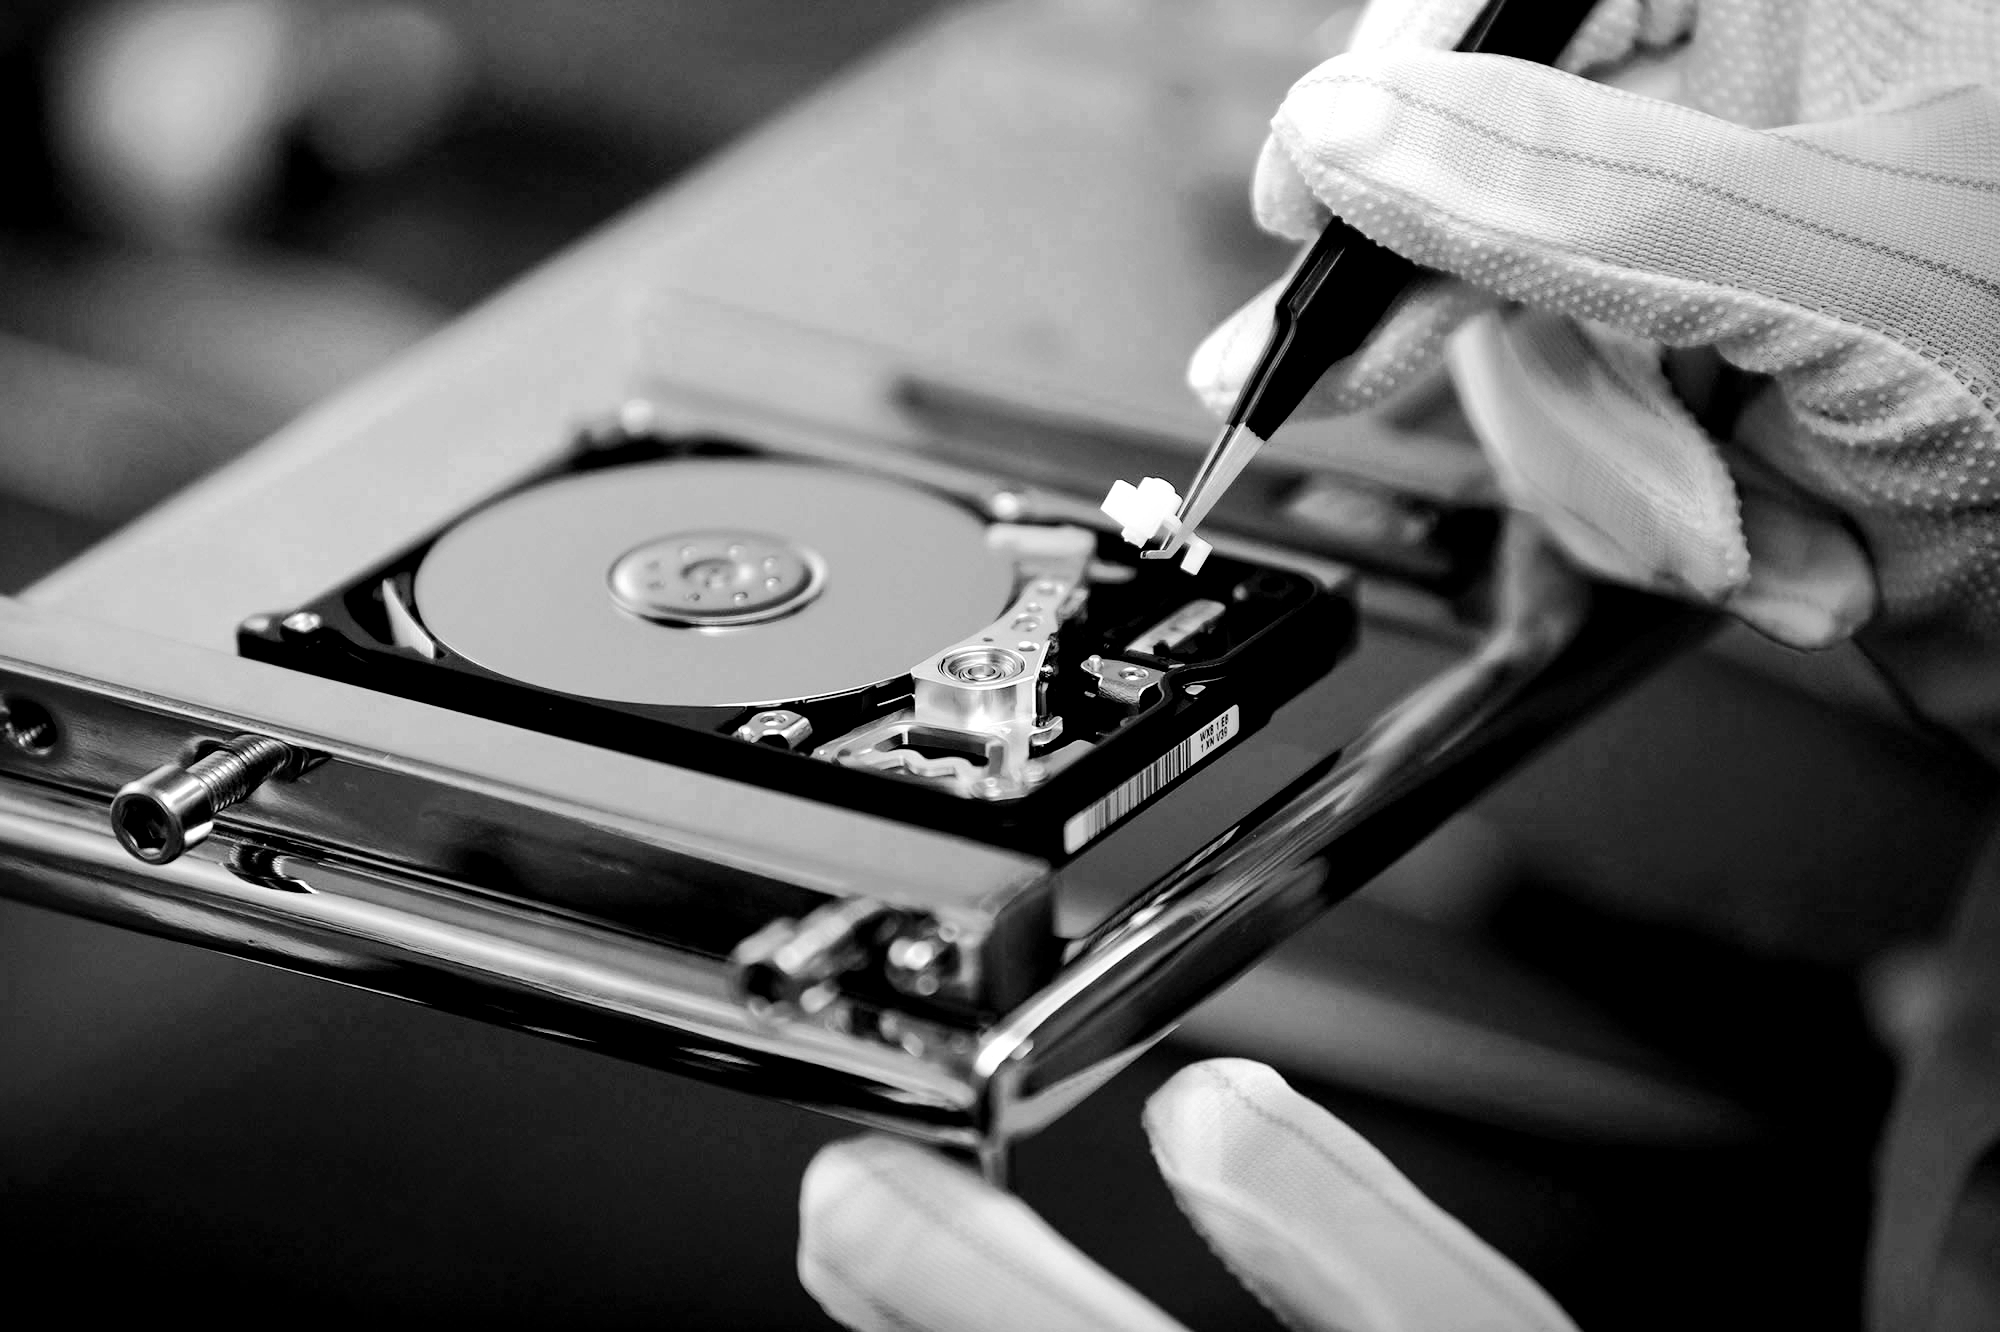 How To Data Recovery From A Damaged SSD Drive?